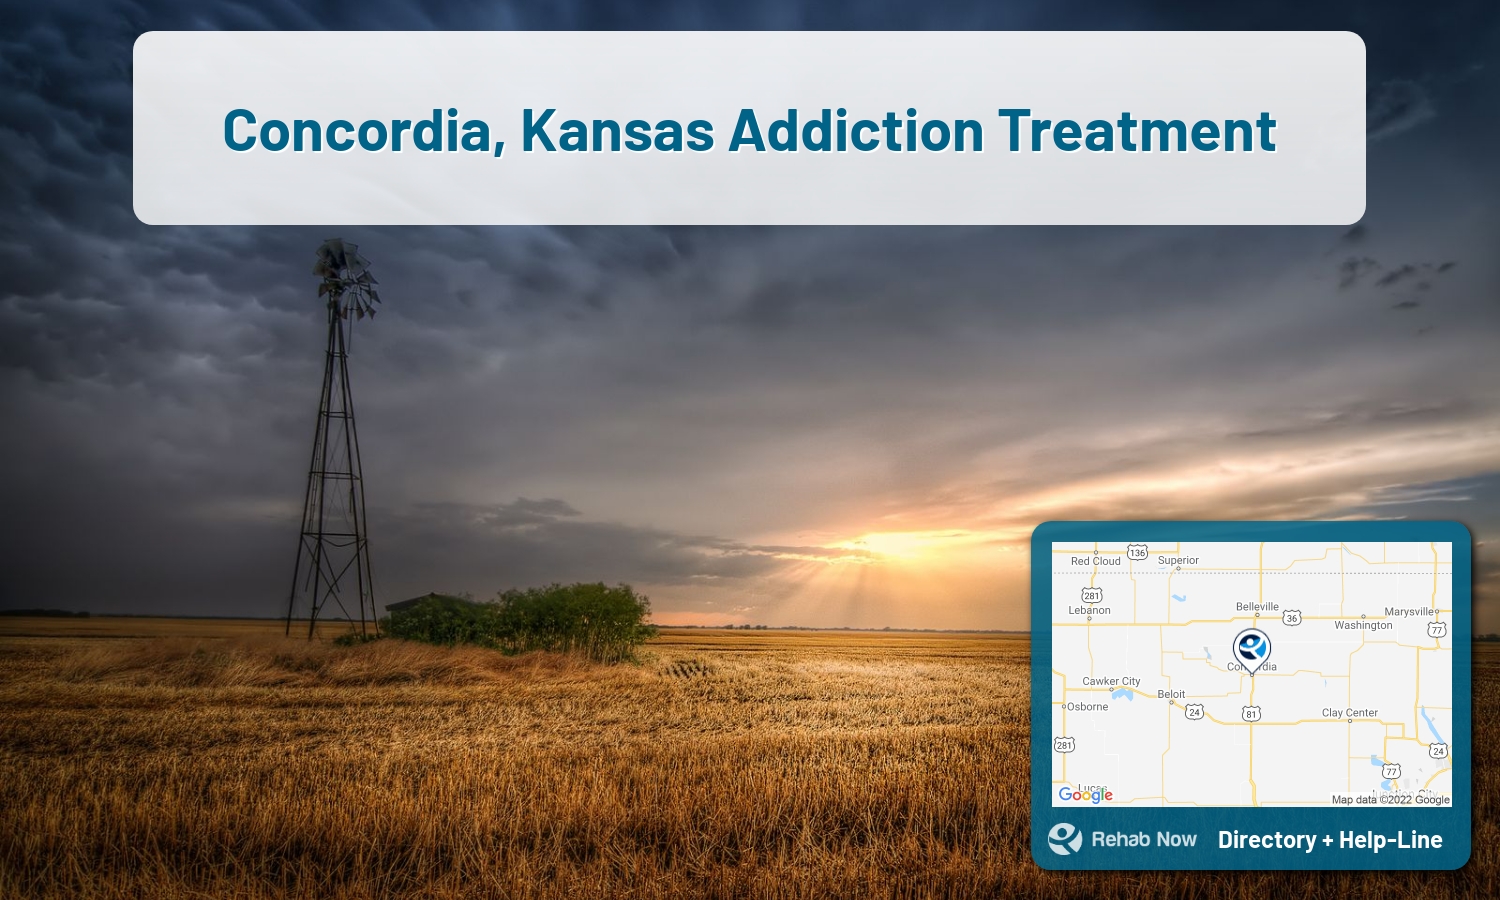 Concordia, KS Treatment Centers. Find drug rehab in Concordia, Kansas, or detox and treatment programs. Get the right help now!